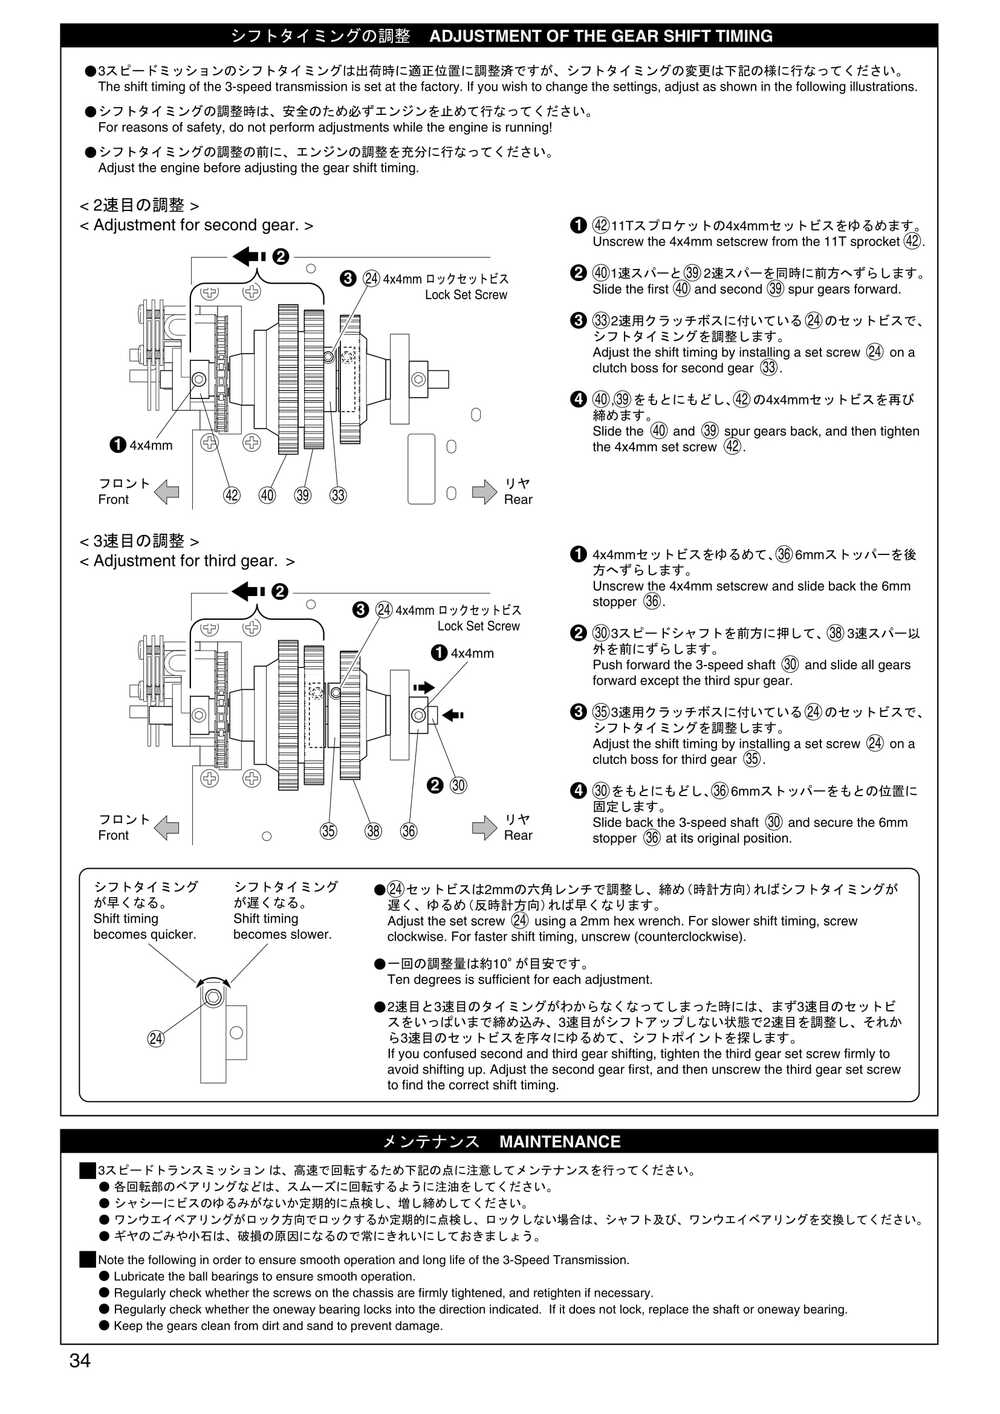 Kyosho - 31221 - Mad-Force - Manual - Page 34